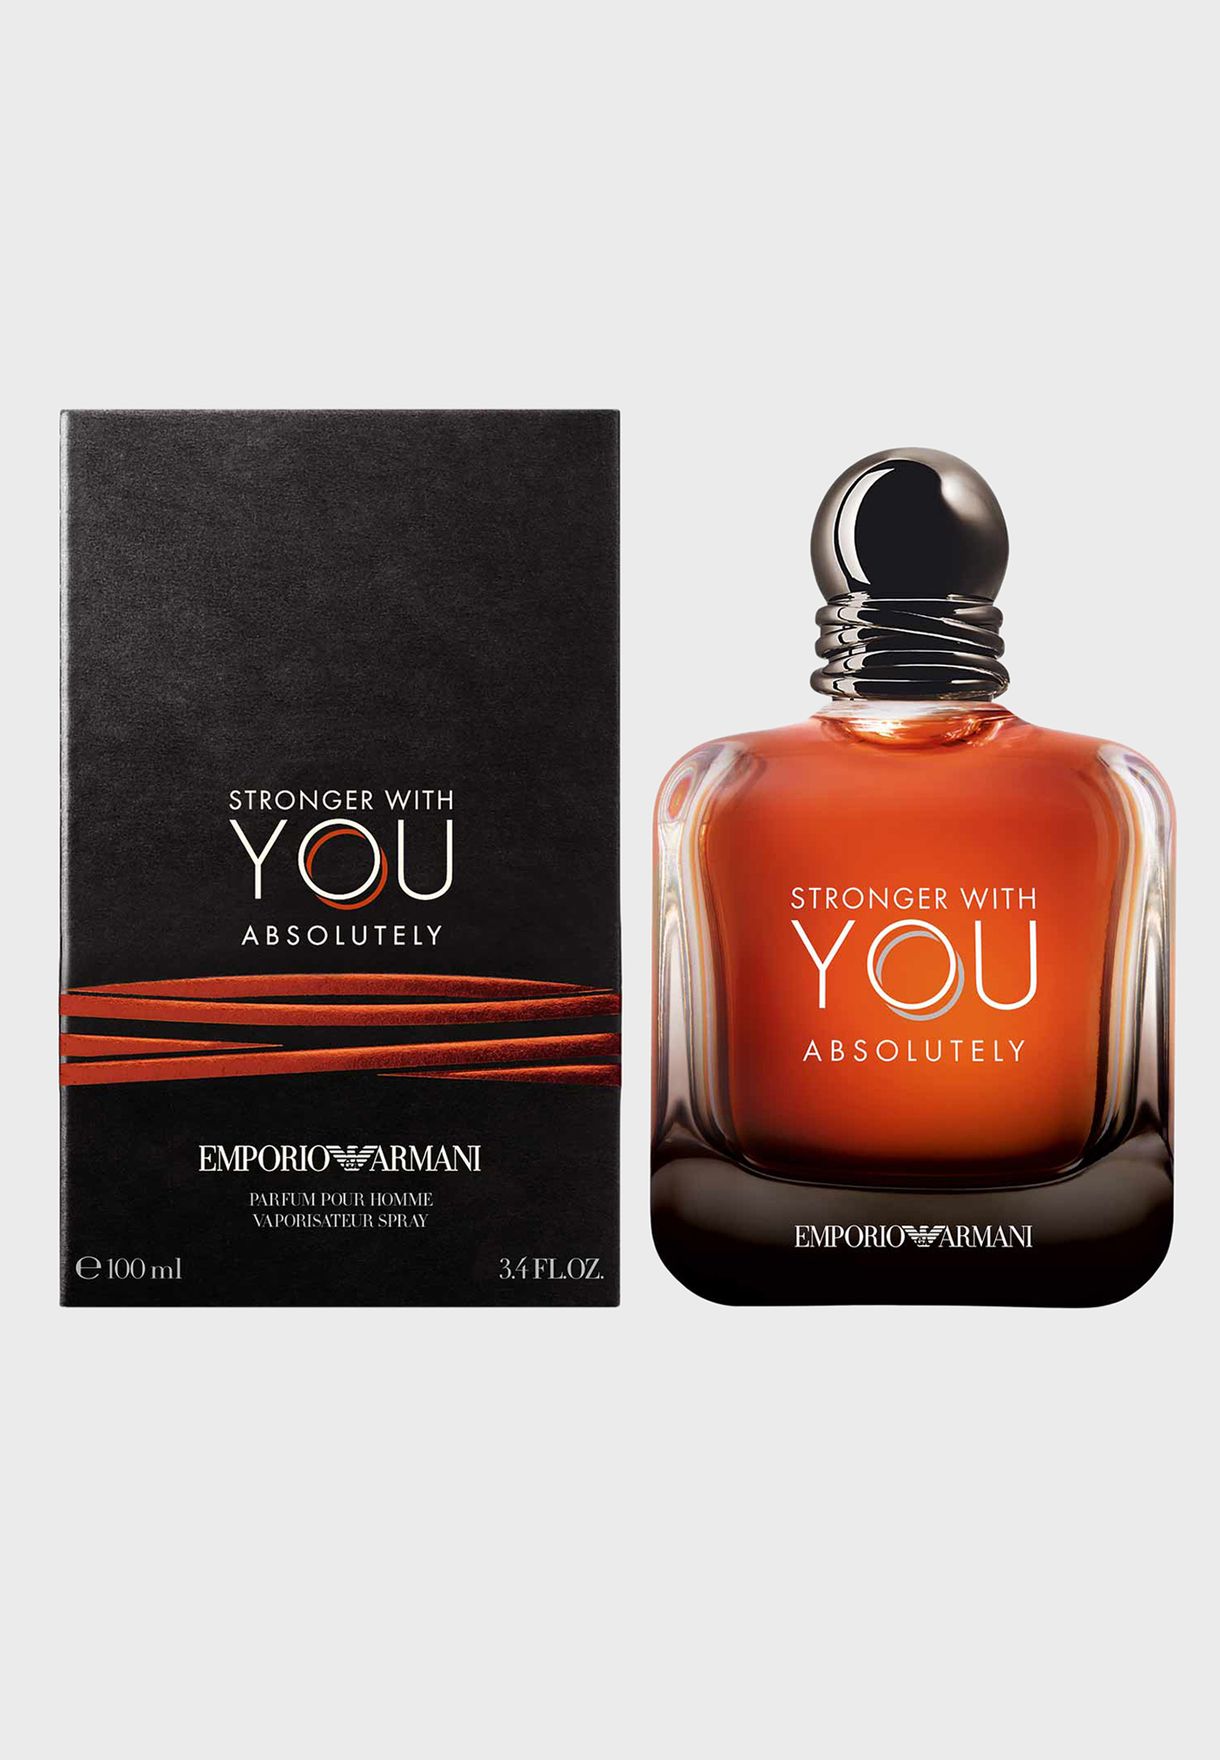 Туалетная вода strong. Духи мужские Армани stronger with you. Giorgio Armani Emporio Armani stronger with you absolutely. Emporio Armani stronger with you 100ml. Emporio Armani stronger with you absolutely.